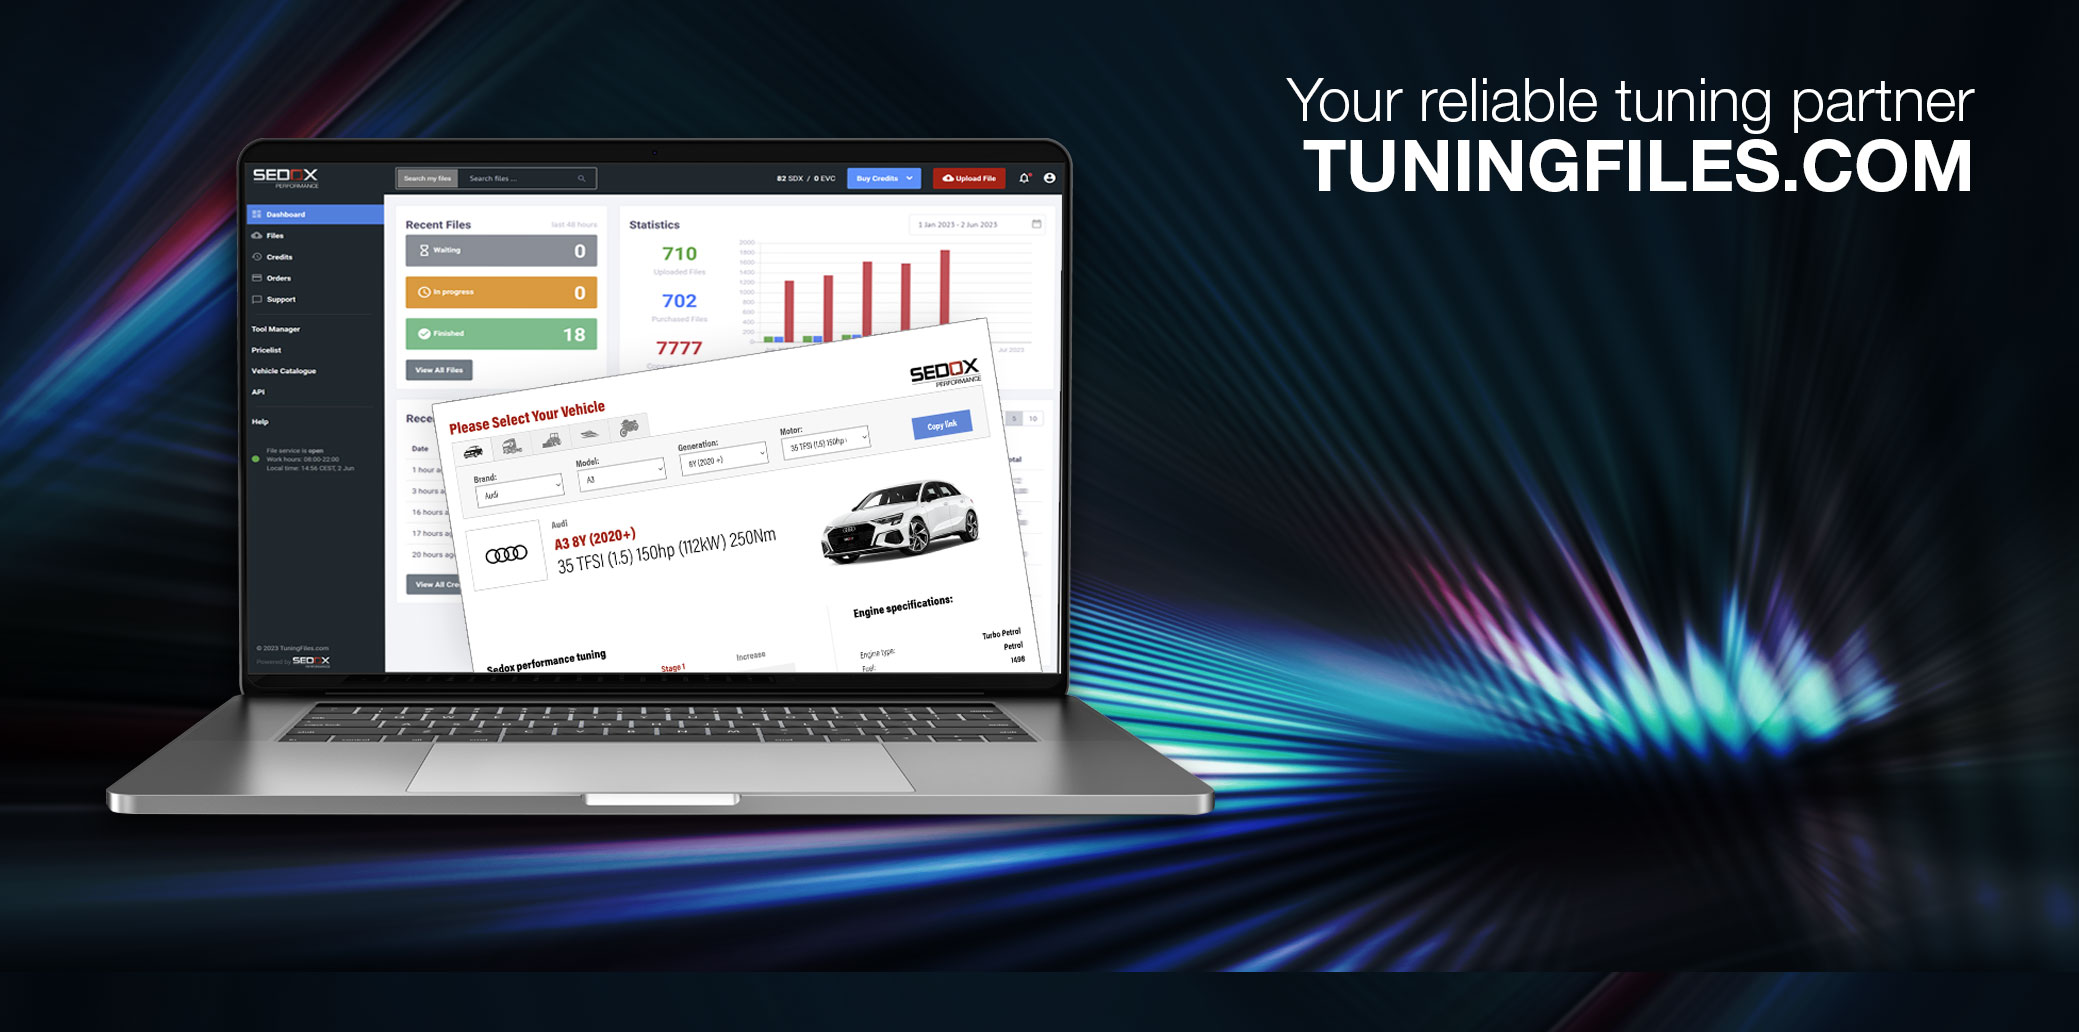 Chiptuning Files Service  Supplier of High Quality Custom Tuning